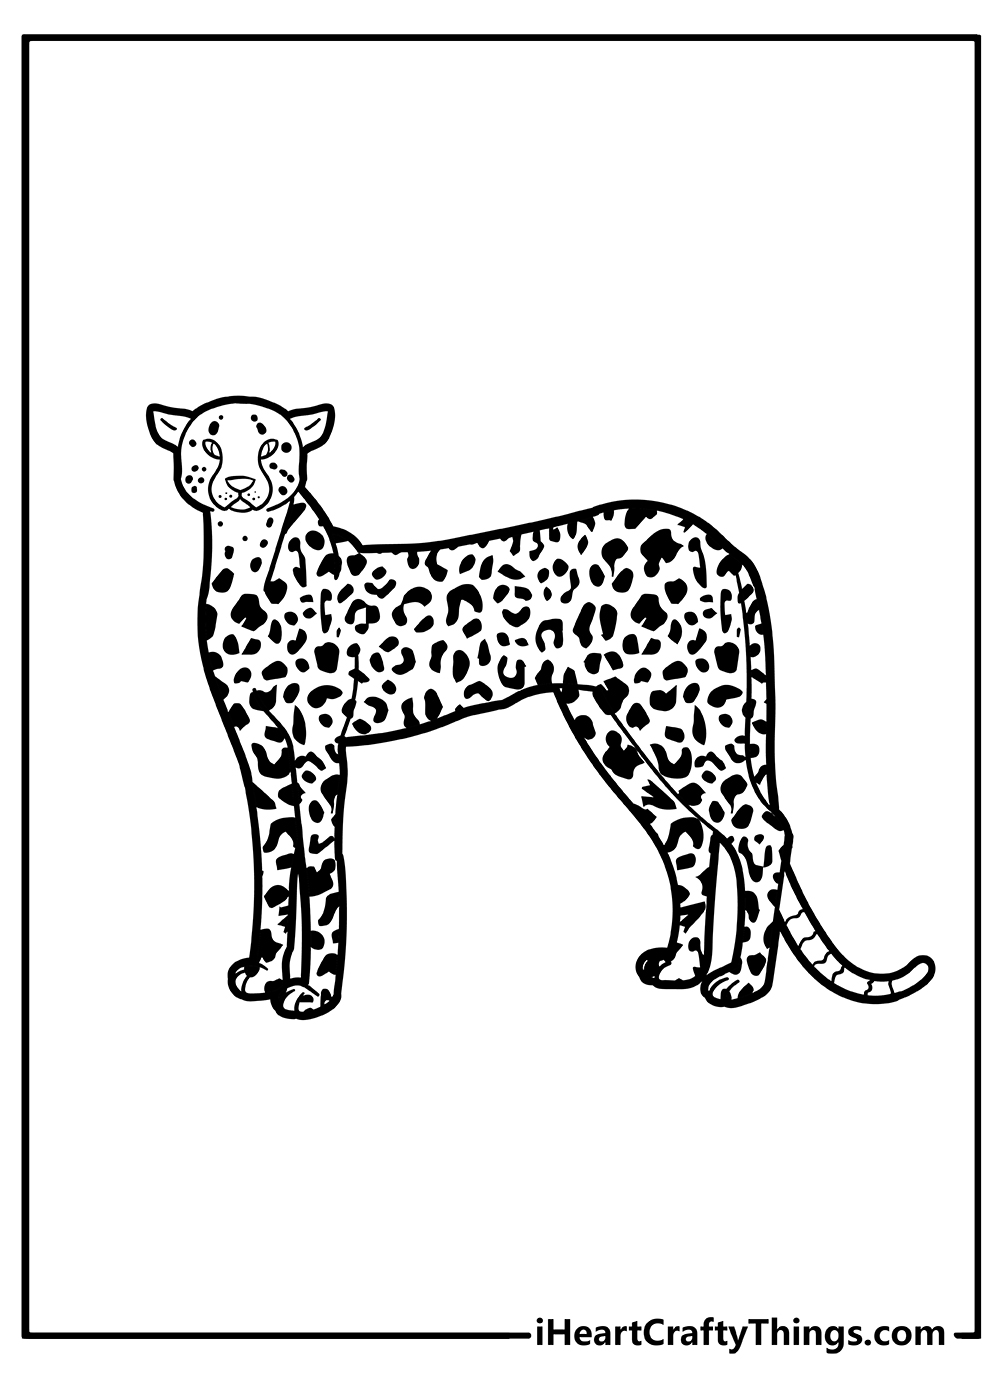 Printable Cheetah Coloring Pages Updated 20